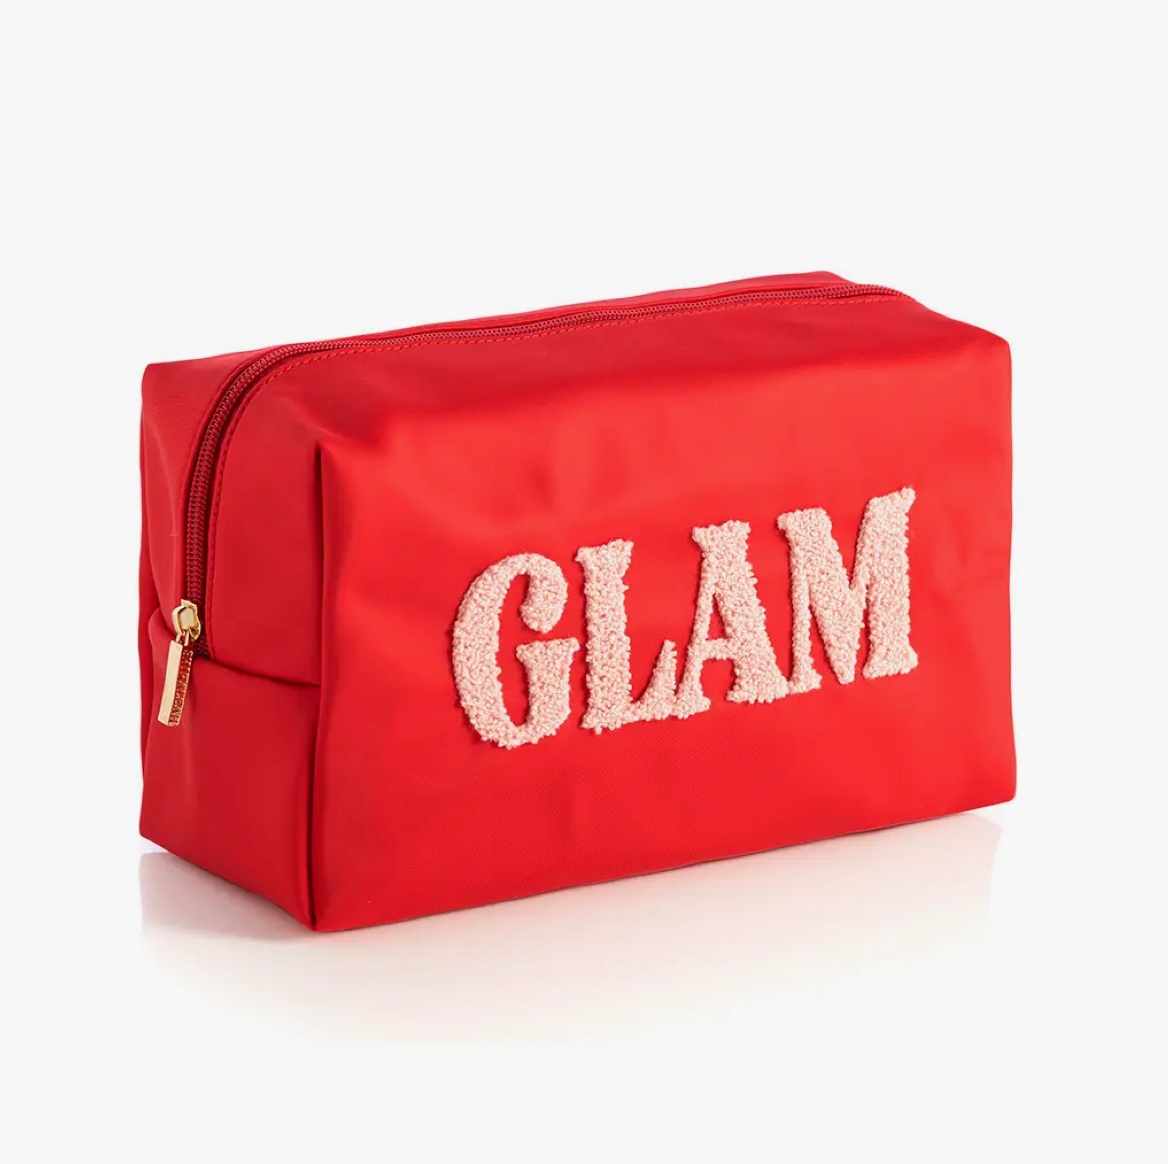 "Glam" Cosmetic Pouch